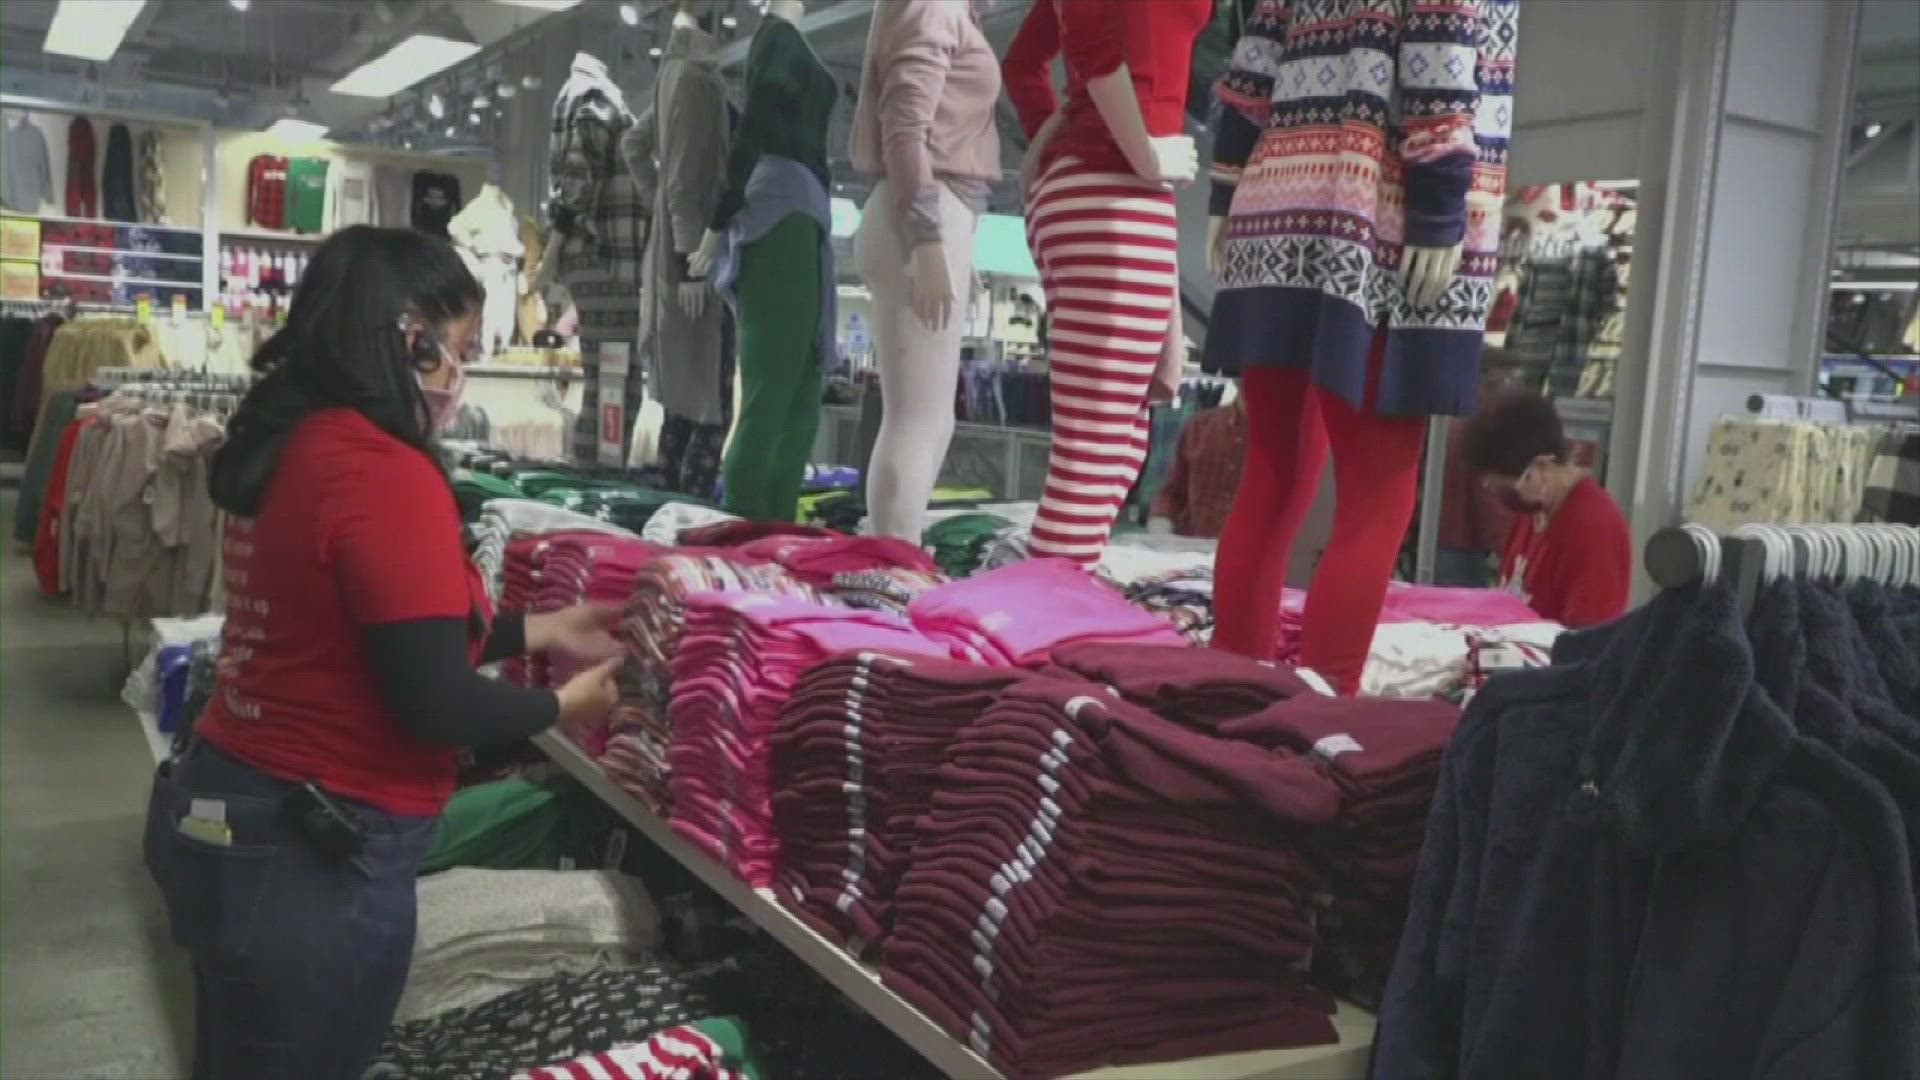 The National Retail Federation says 52% of retailers plan to shop the week before Dec. 25.